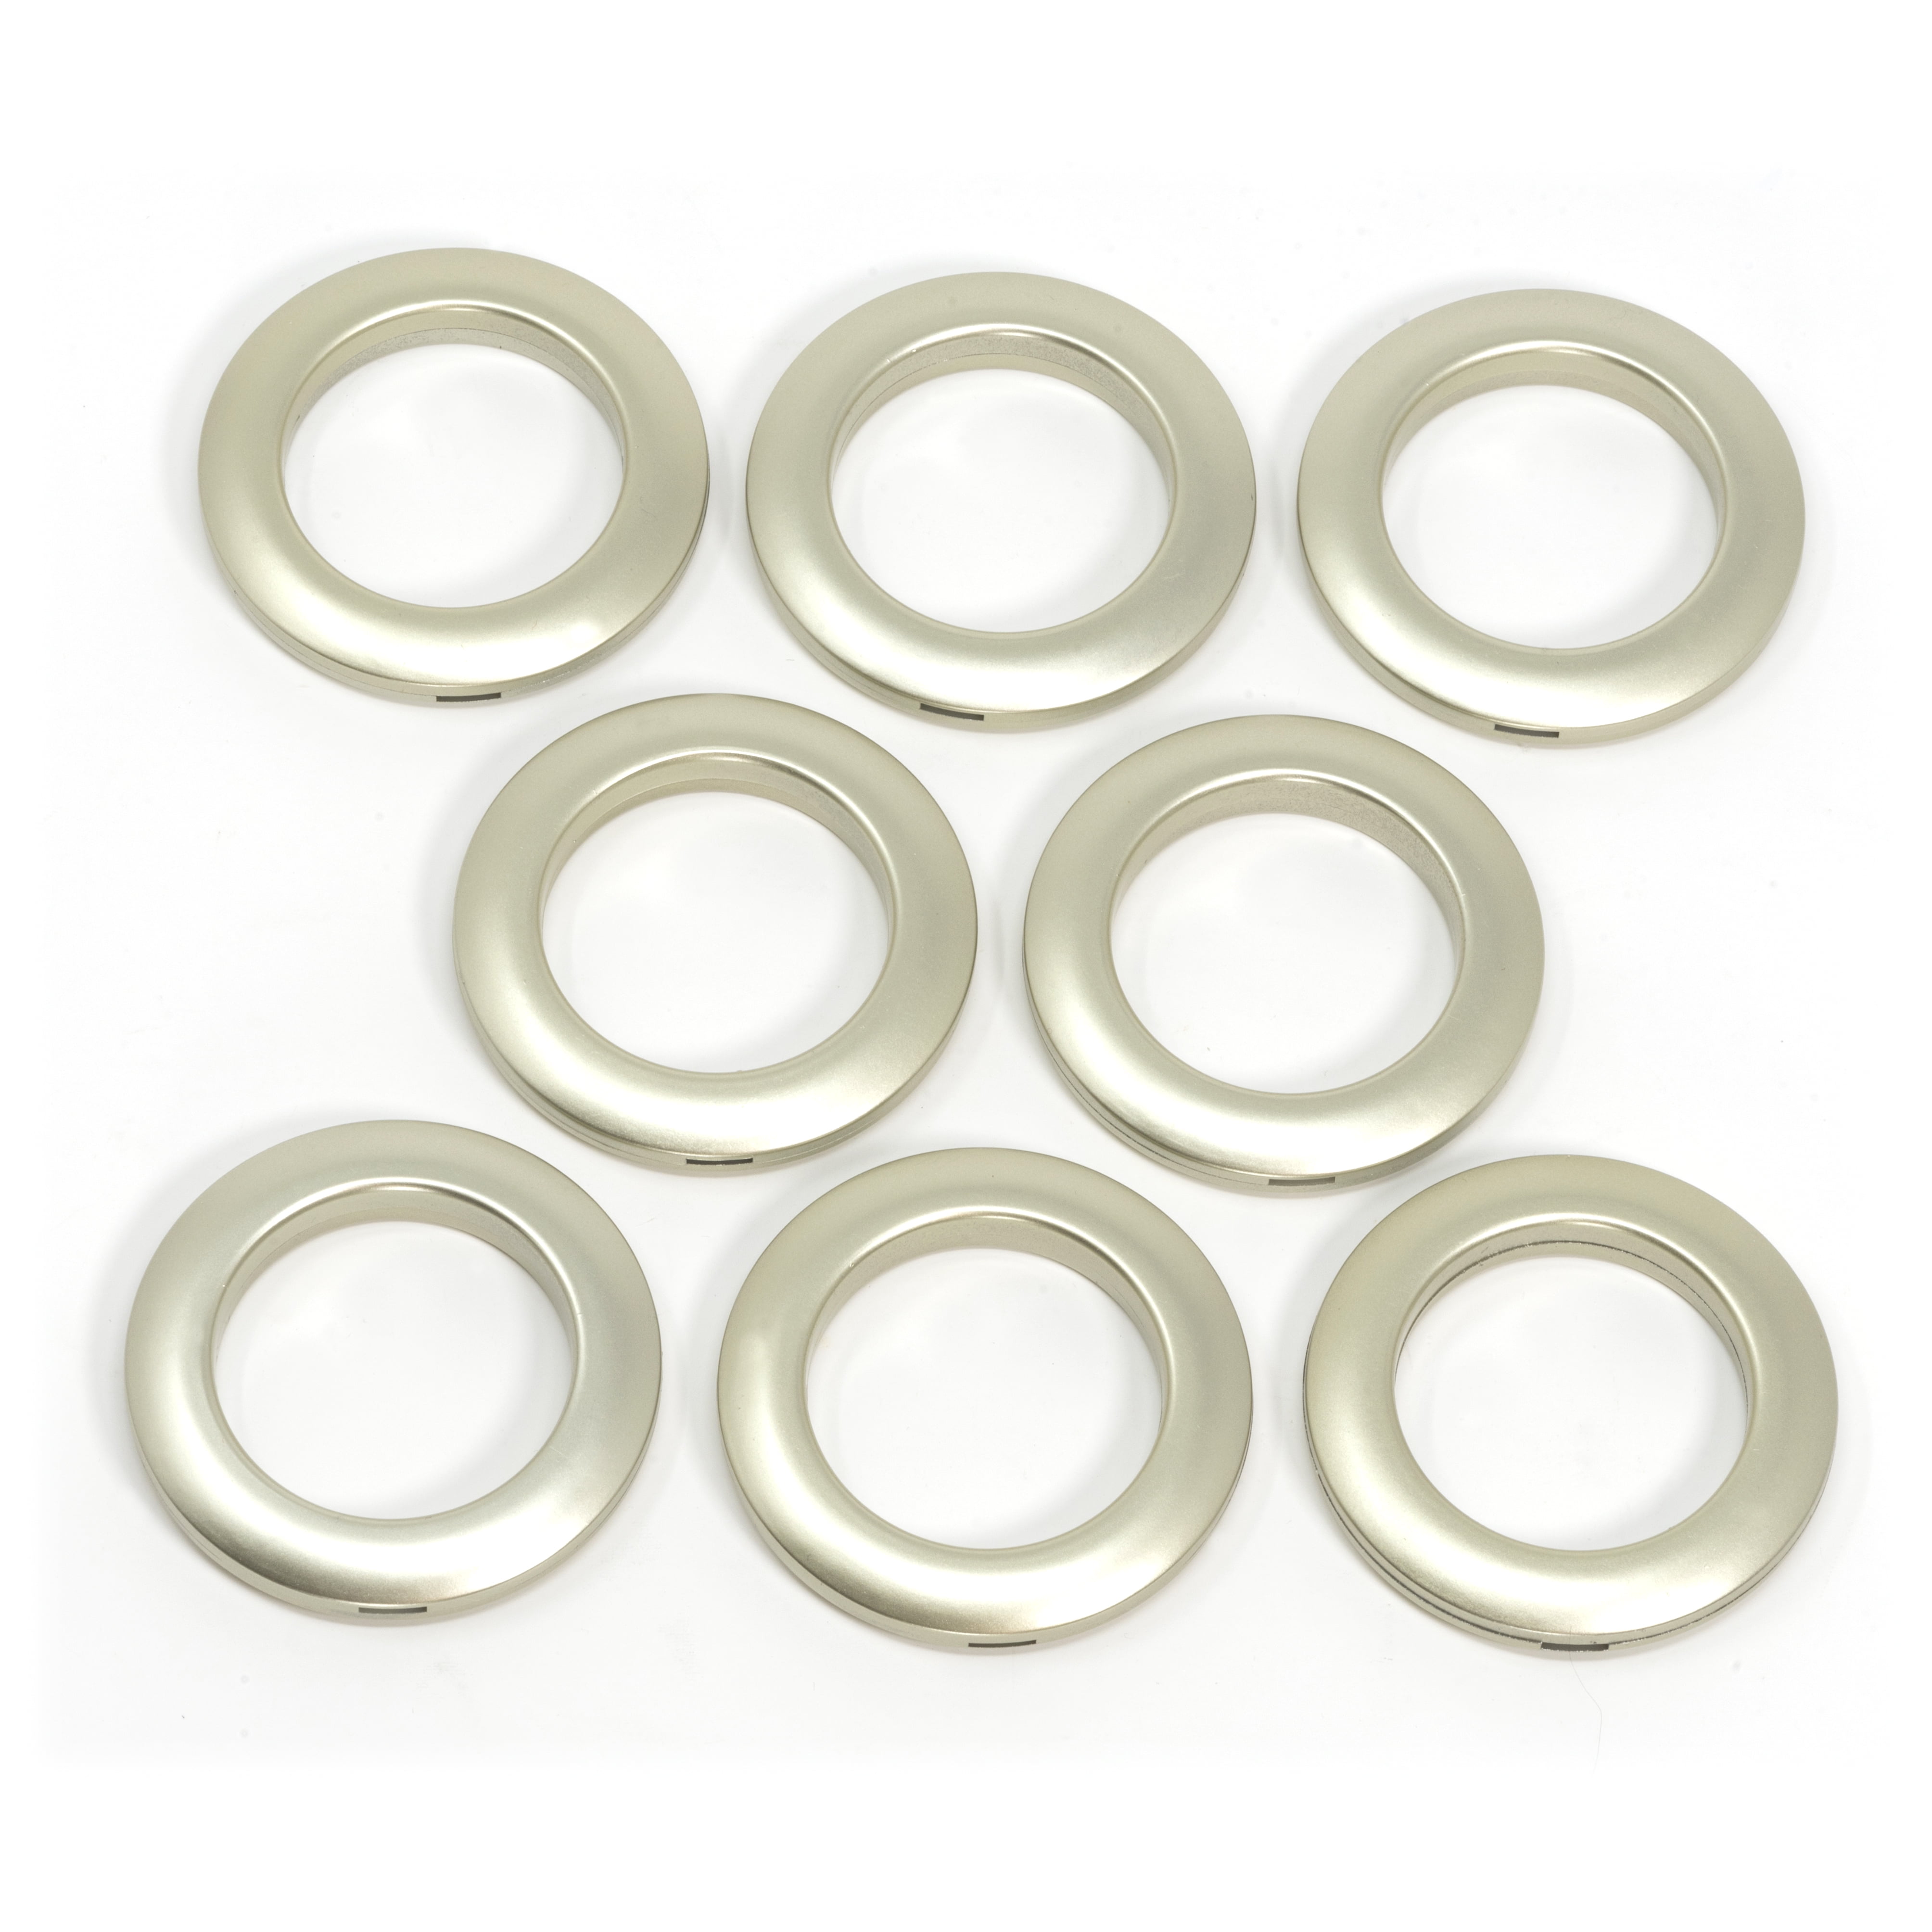 Kuasting Curtain Grommets Surface 28 pcs Stainless Steel Metal Curtain  Eyelet Rings Inner Layer ABS Plastic Large Metal Grommets 1.65“ Metal  Grommets